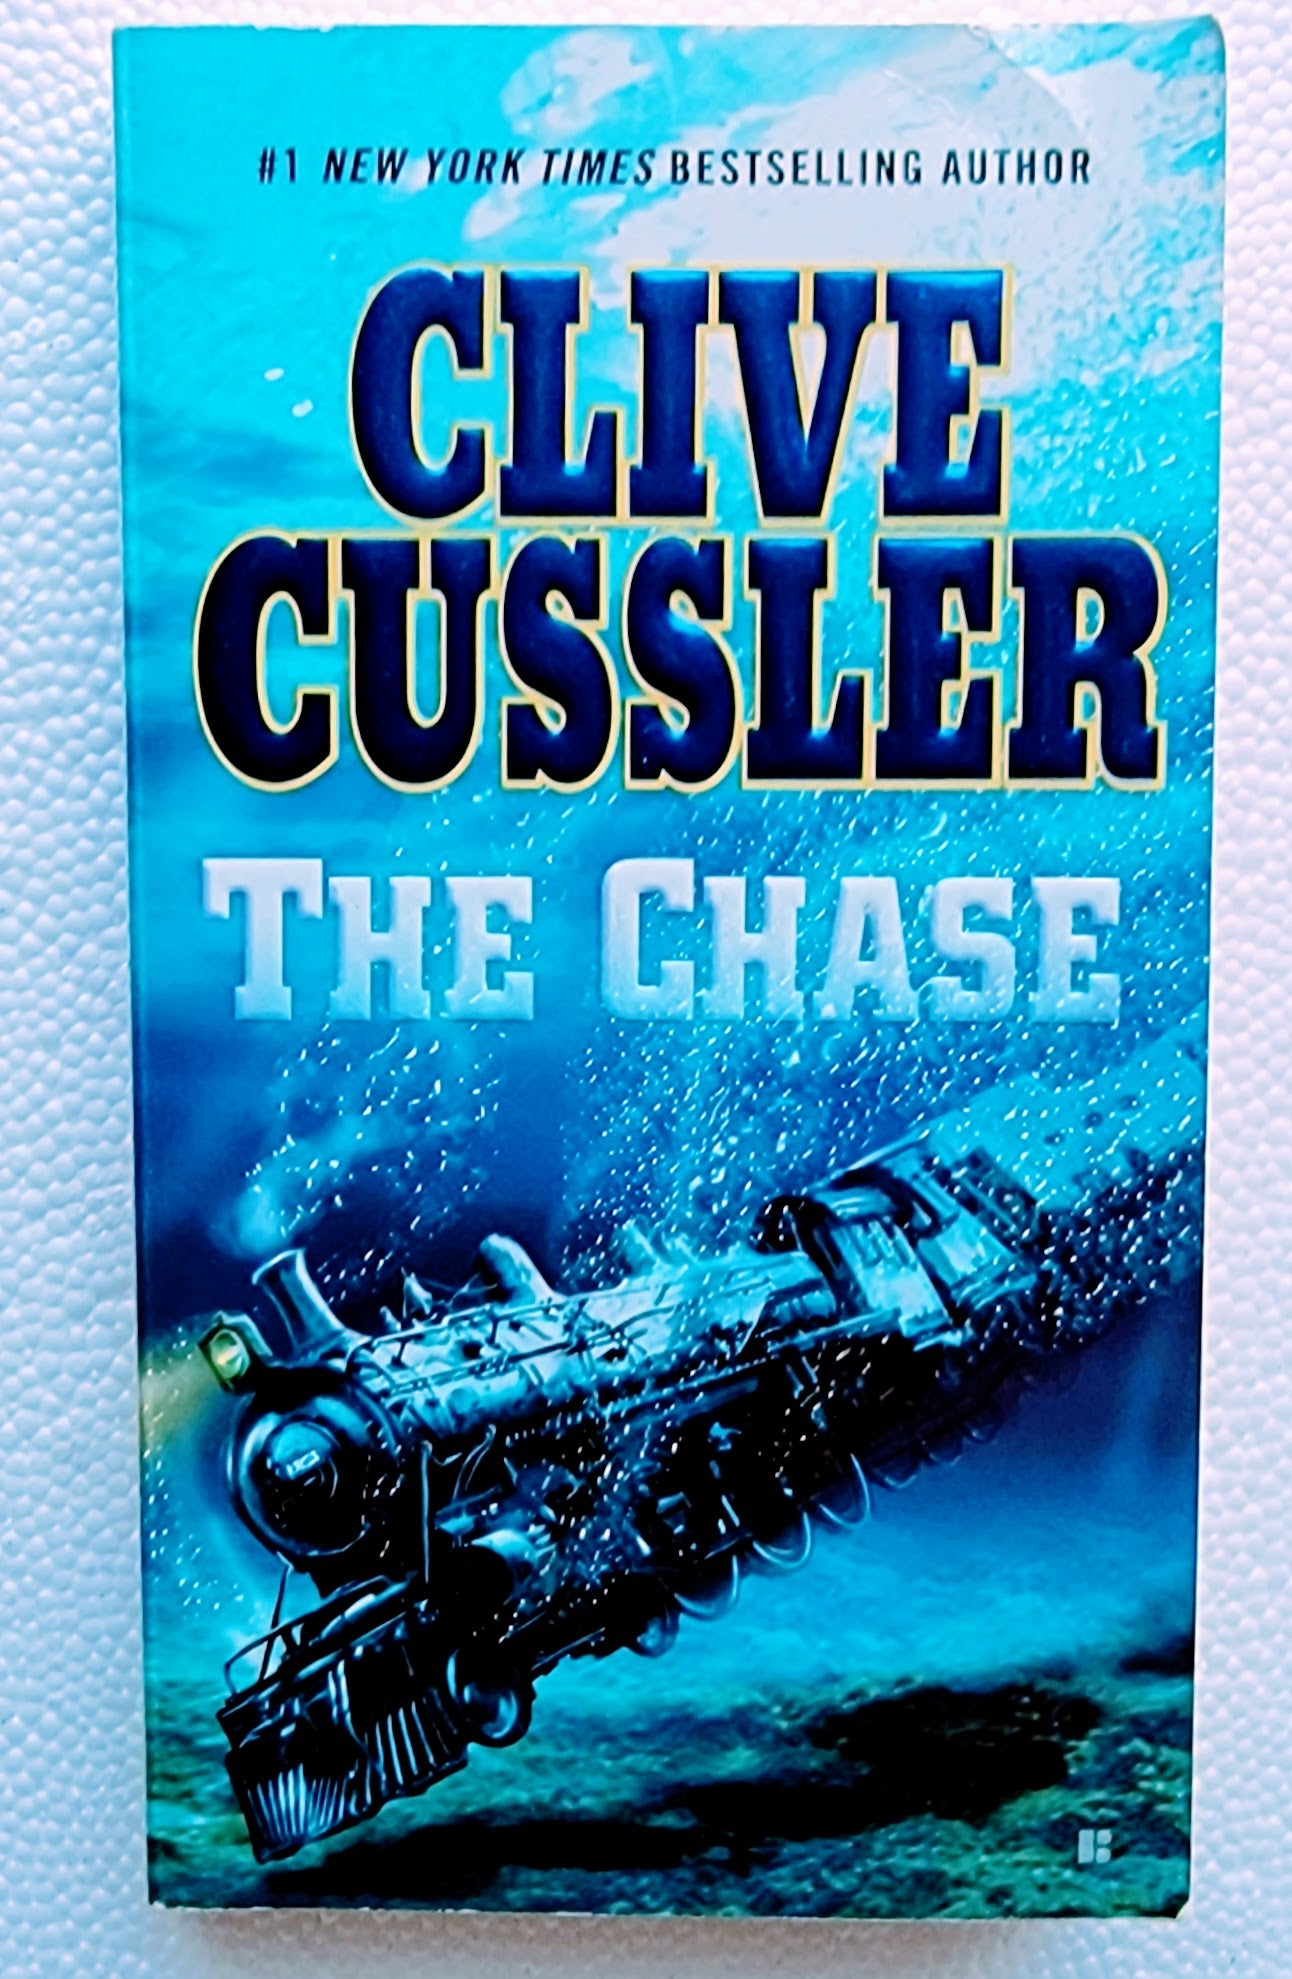 The Chase: A Heart-Stopping Historical Thriller Book by Clive Cussler  Xclusive Collectibles   